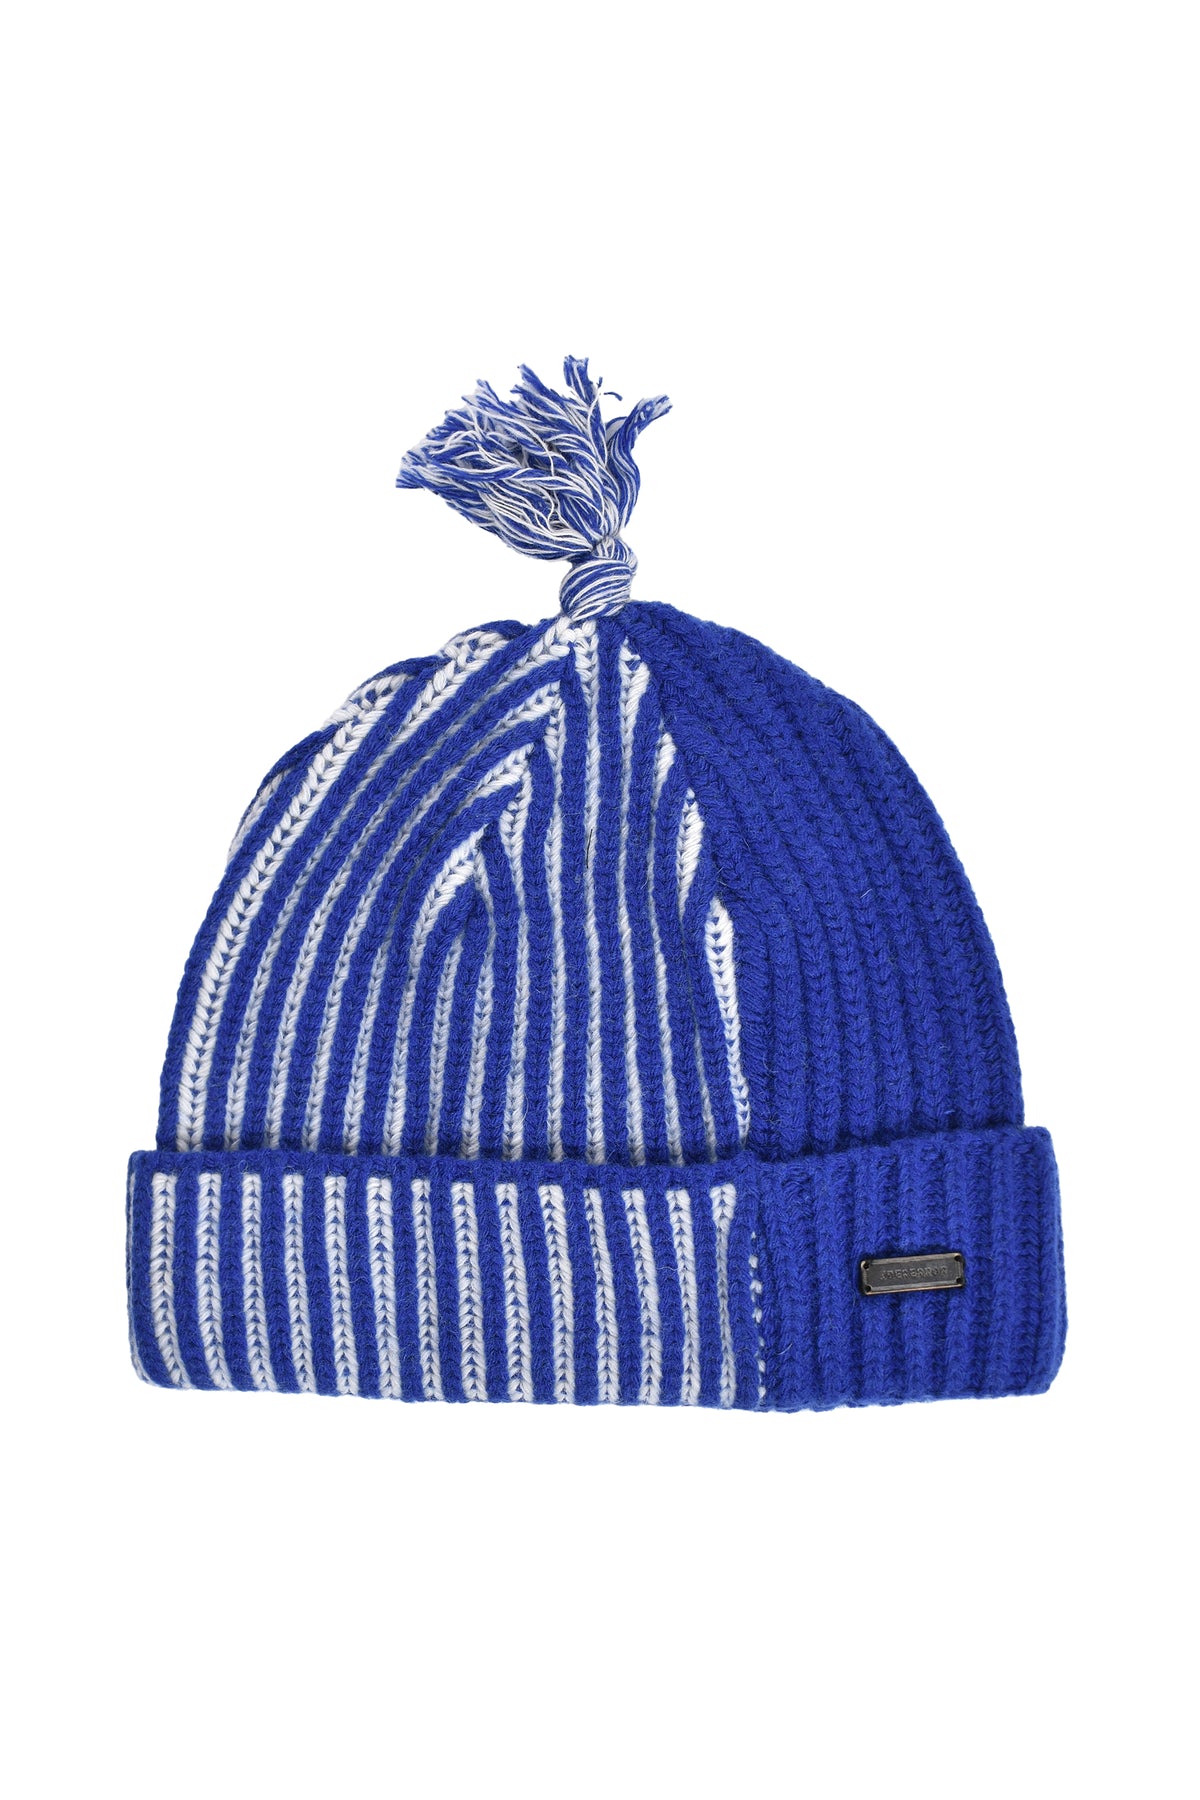 ADERERROR BEANIE WITH COMBINATION COLORS / BLU